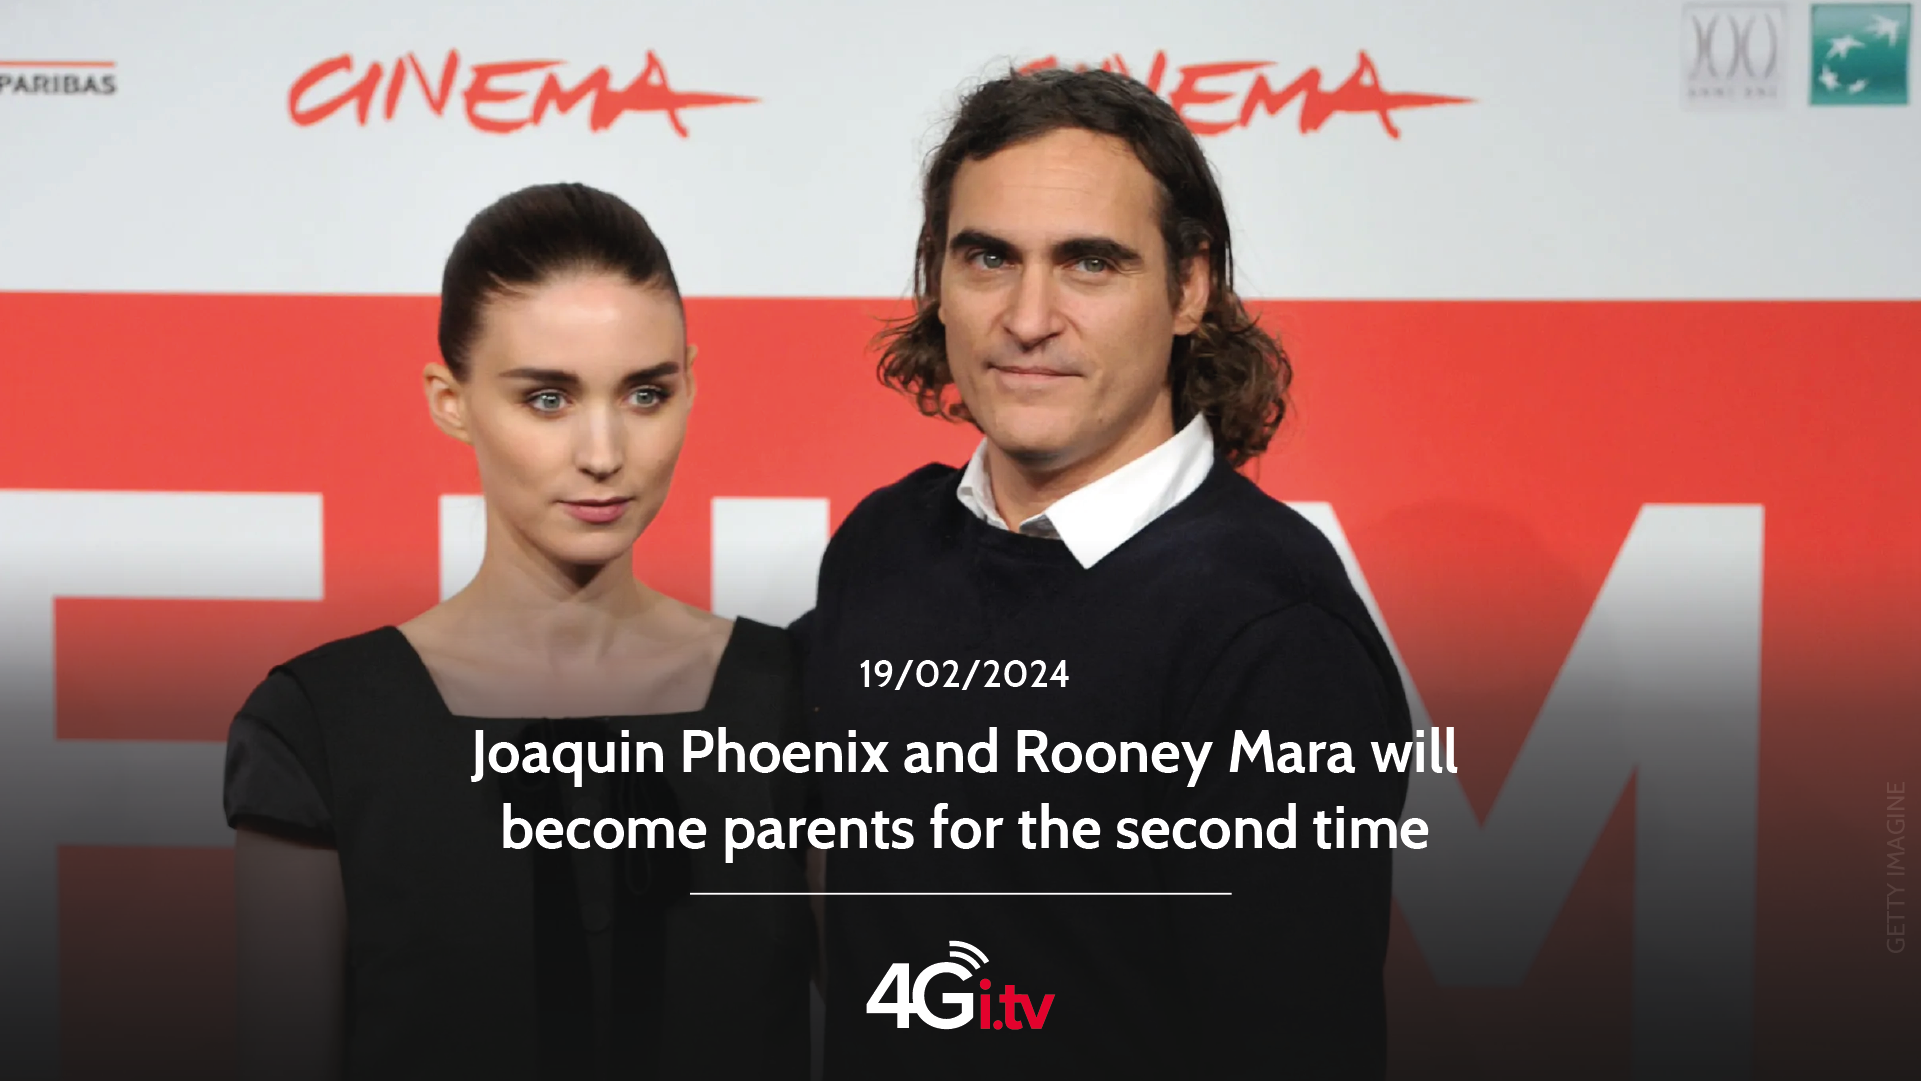 Lesen Sie mehr über den Artikel Joaquin Phoenix and Rooney Mara will become parents for the second time 